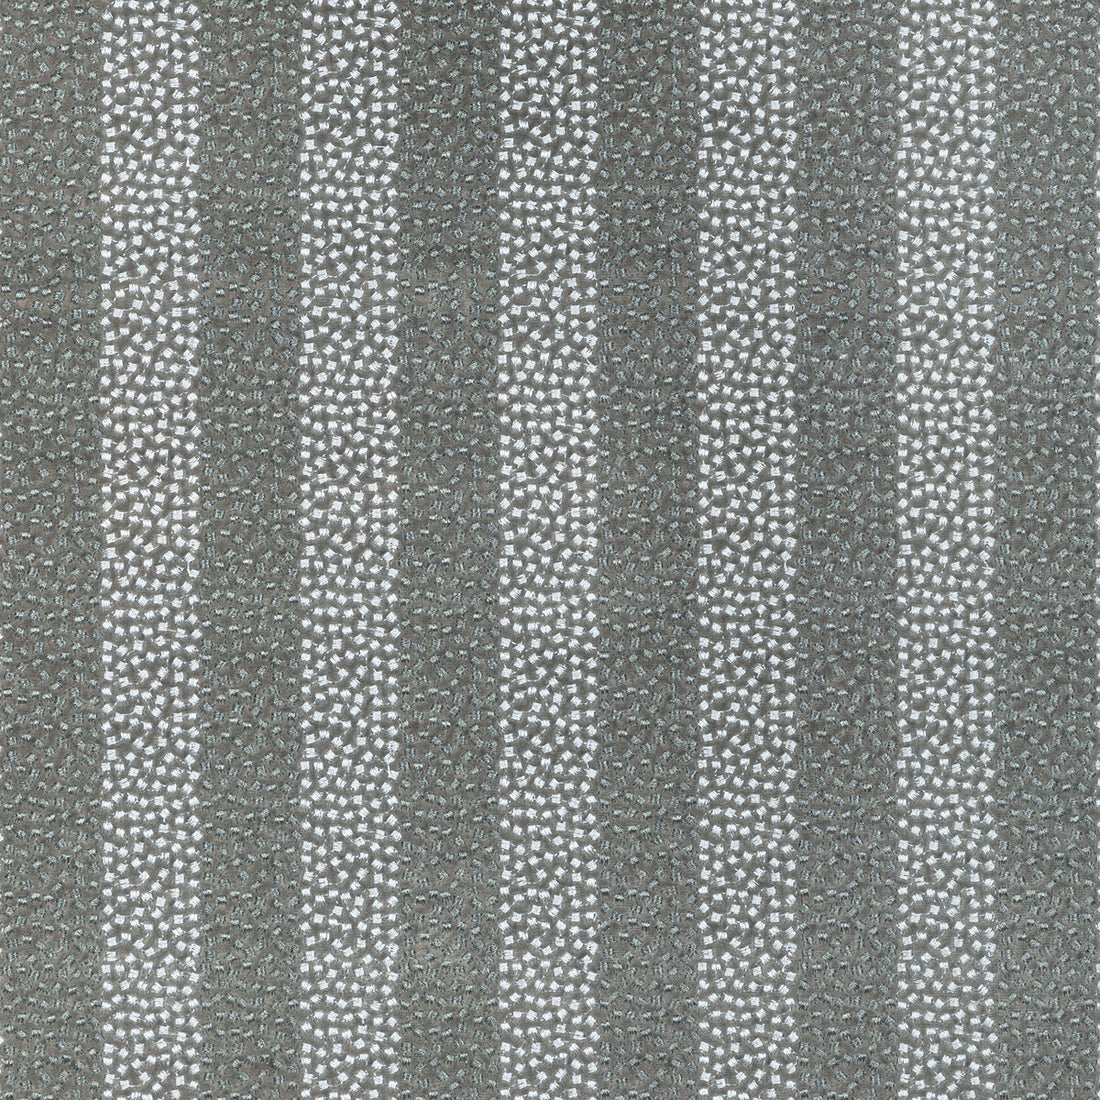 Proximity fabric in pewter color - pattern 36341.21.0 - by Kravet Couture in the Modern Luxe III collection